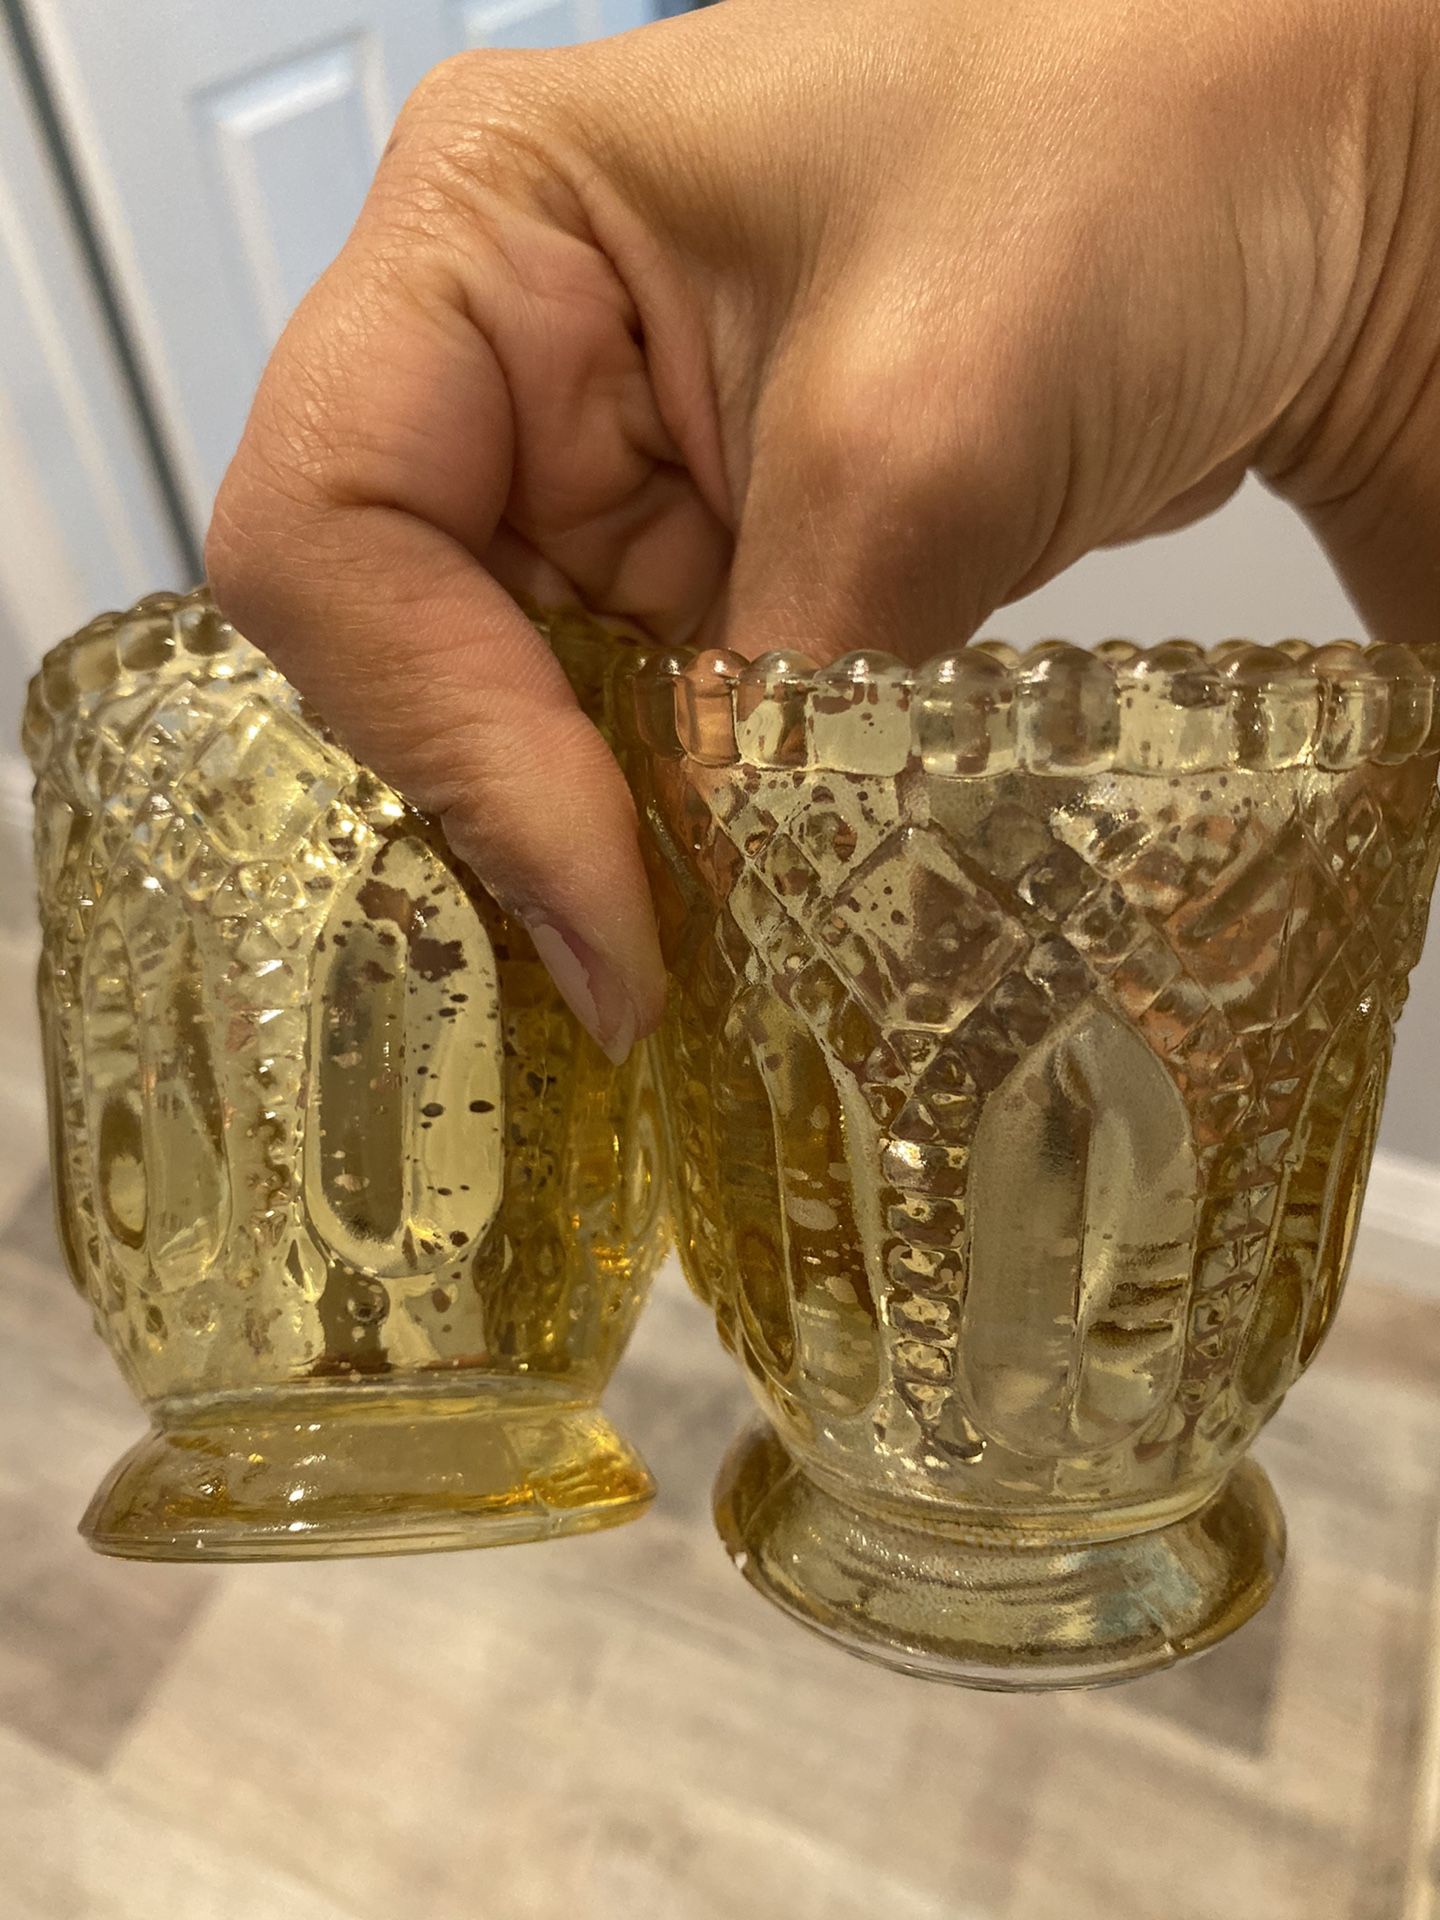 Vintage Gold Votive candle holders (36 count $2.00 each)